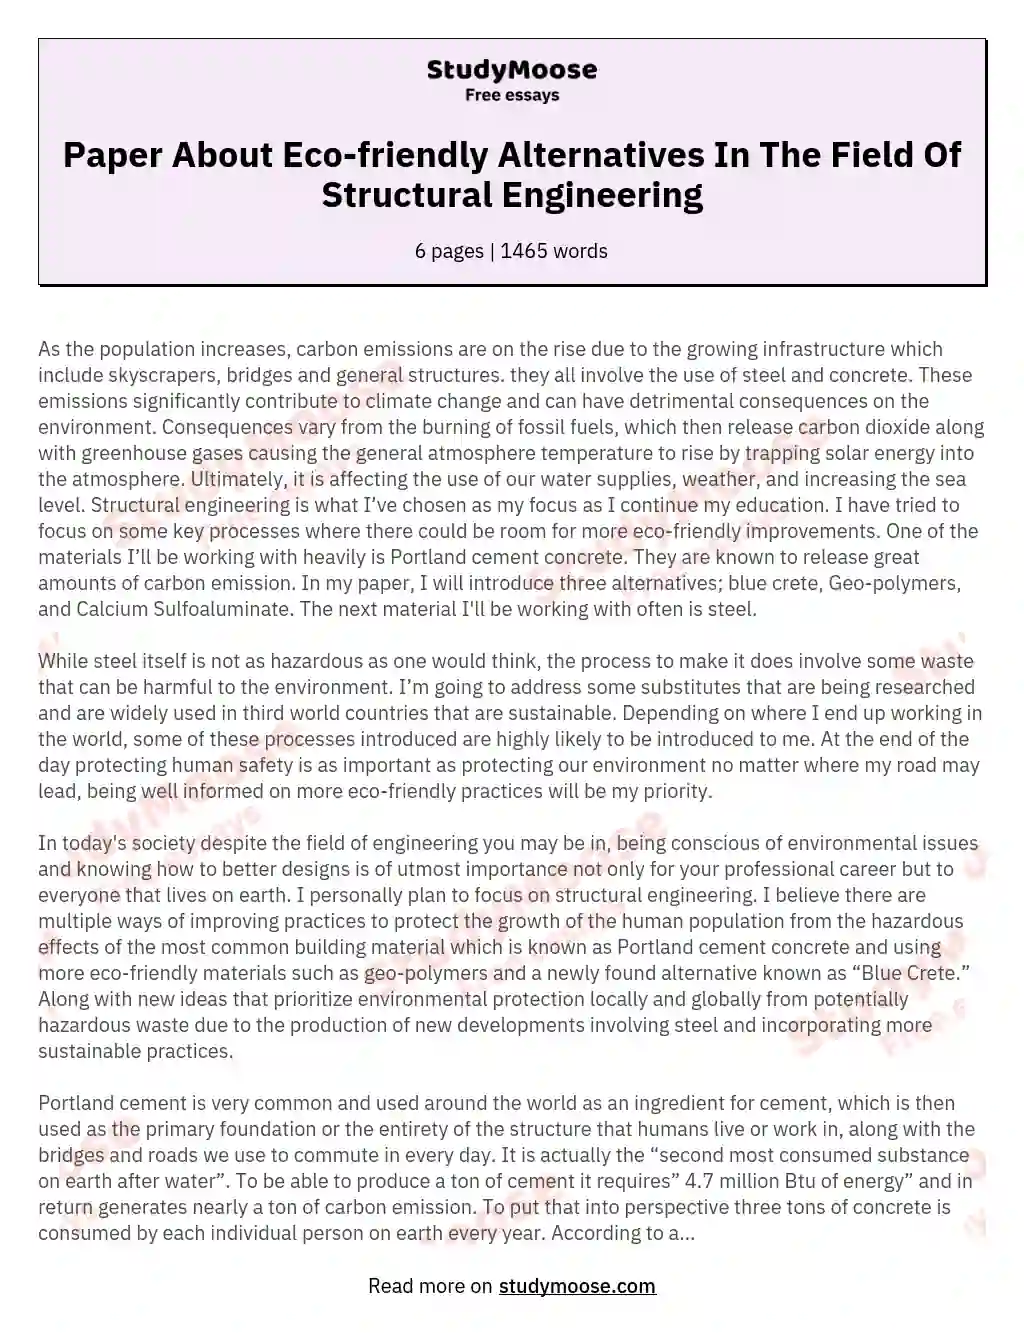 Paper About Eco-friendly Alternatives In The Field Of Structural Engineering essay